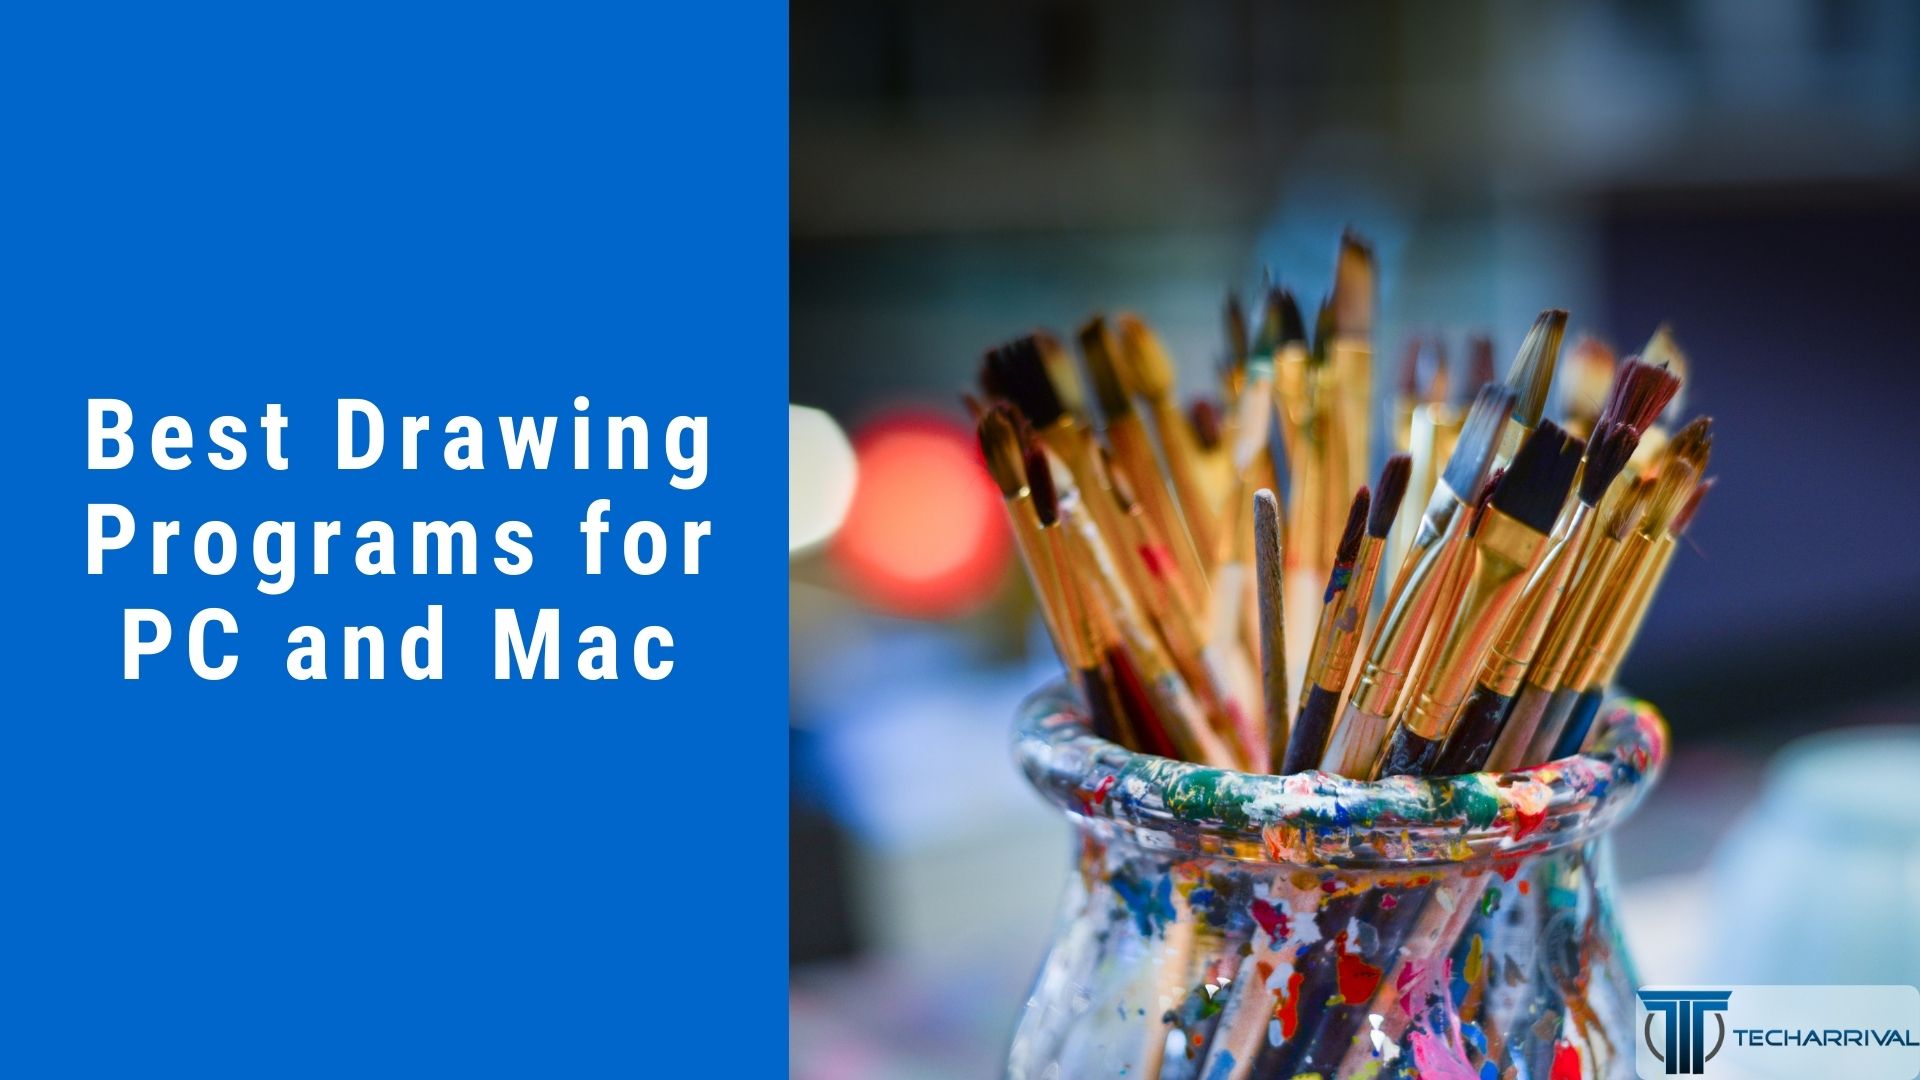 14 Best Drawing Programs for PC and Mac (2021)